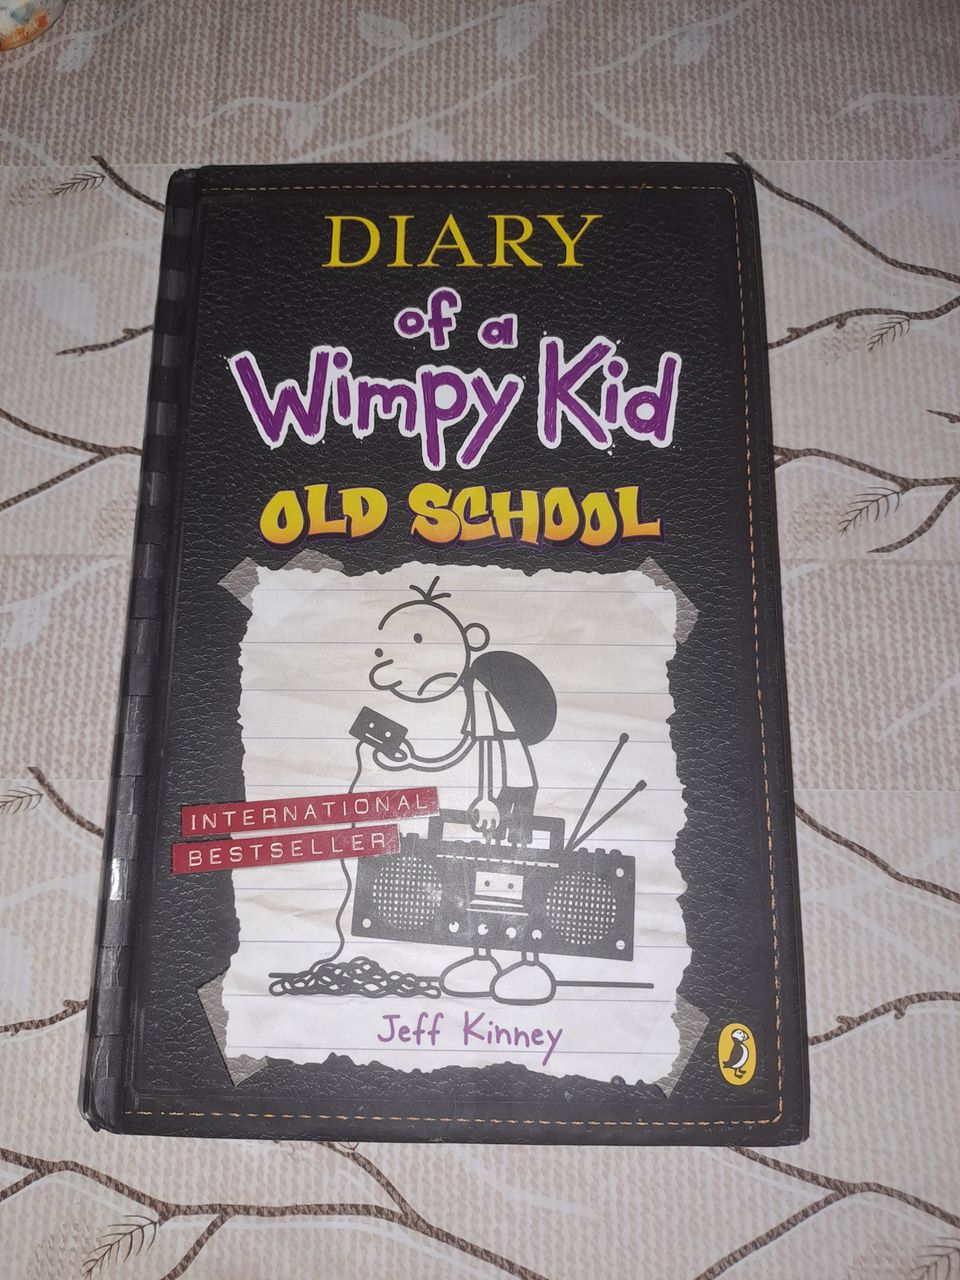 Diary of a Wimpy Kid (Old School)